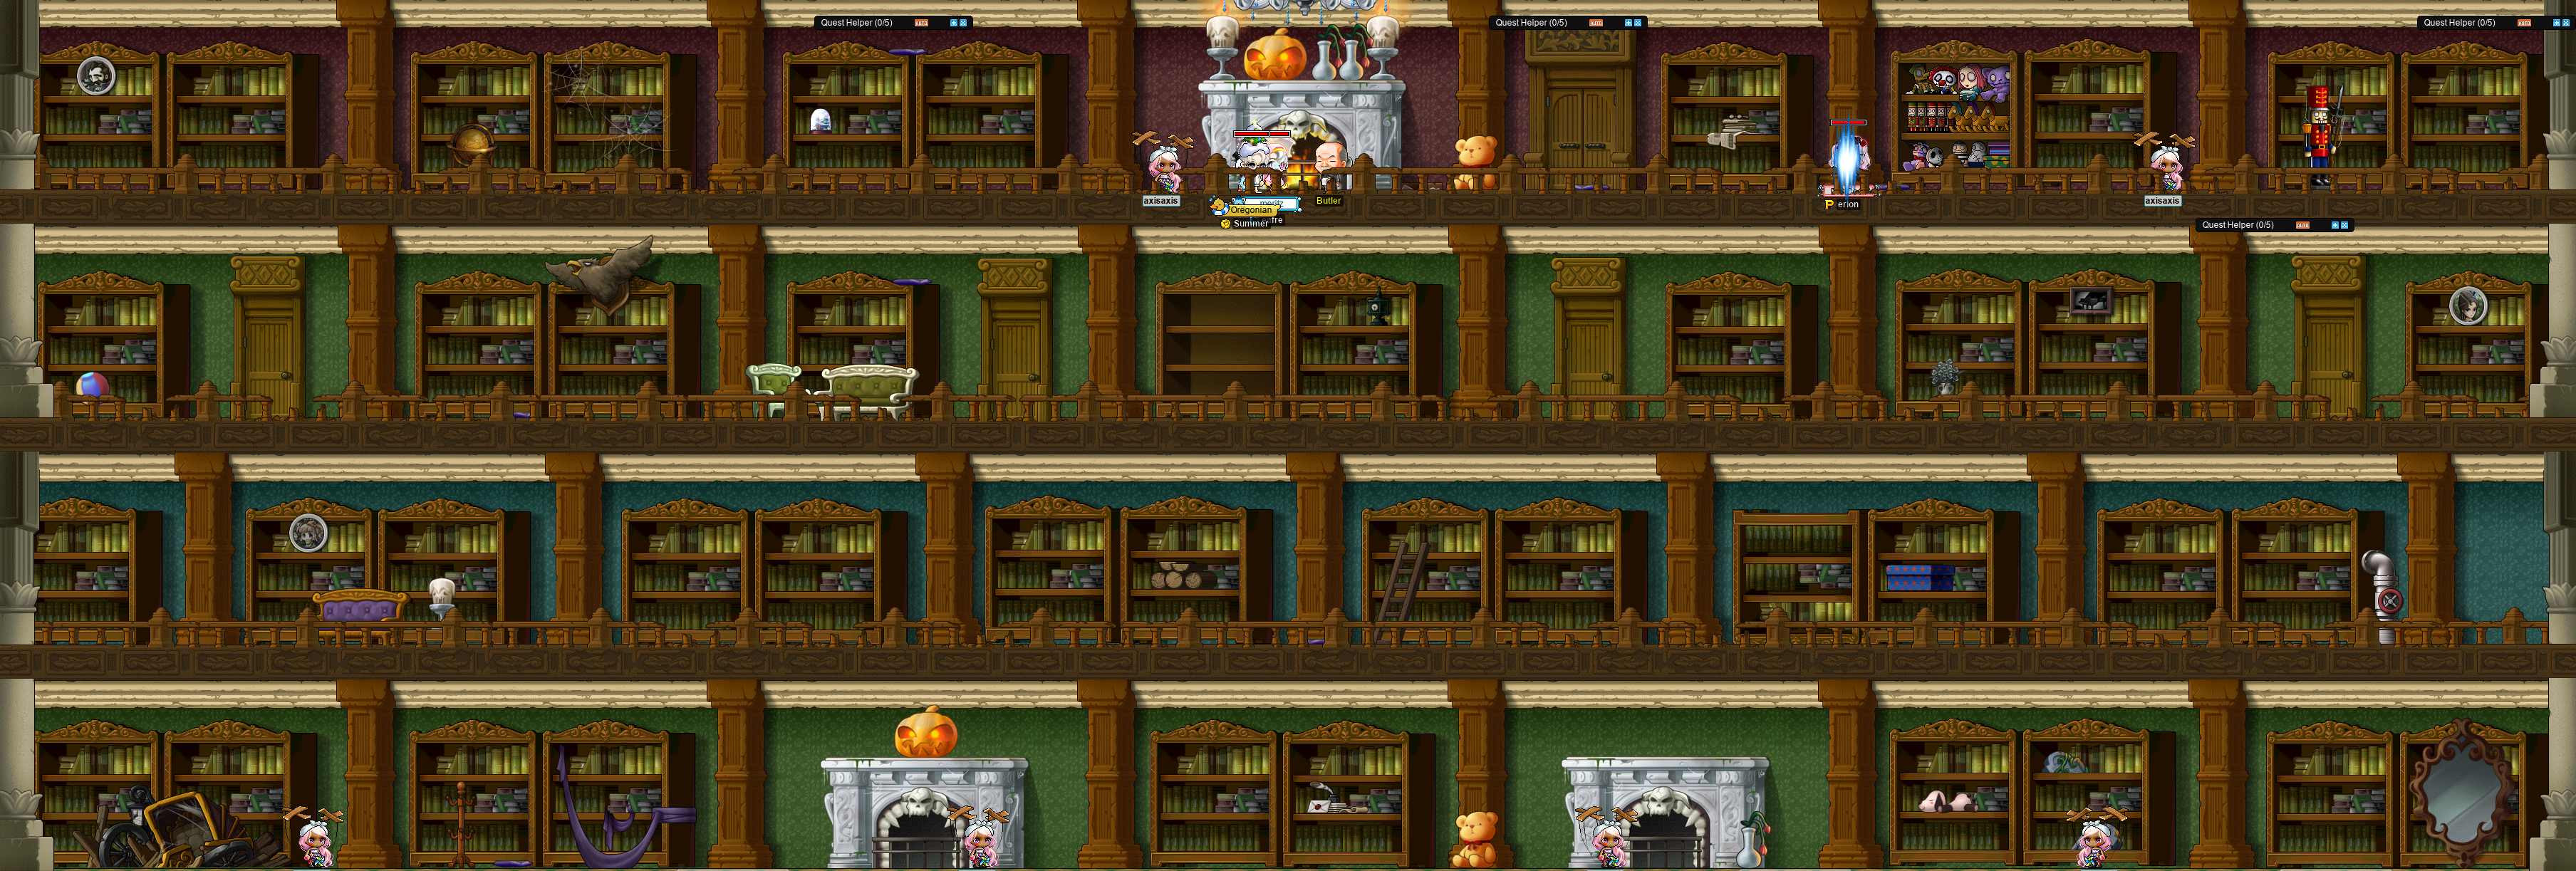 Library Room panorama